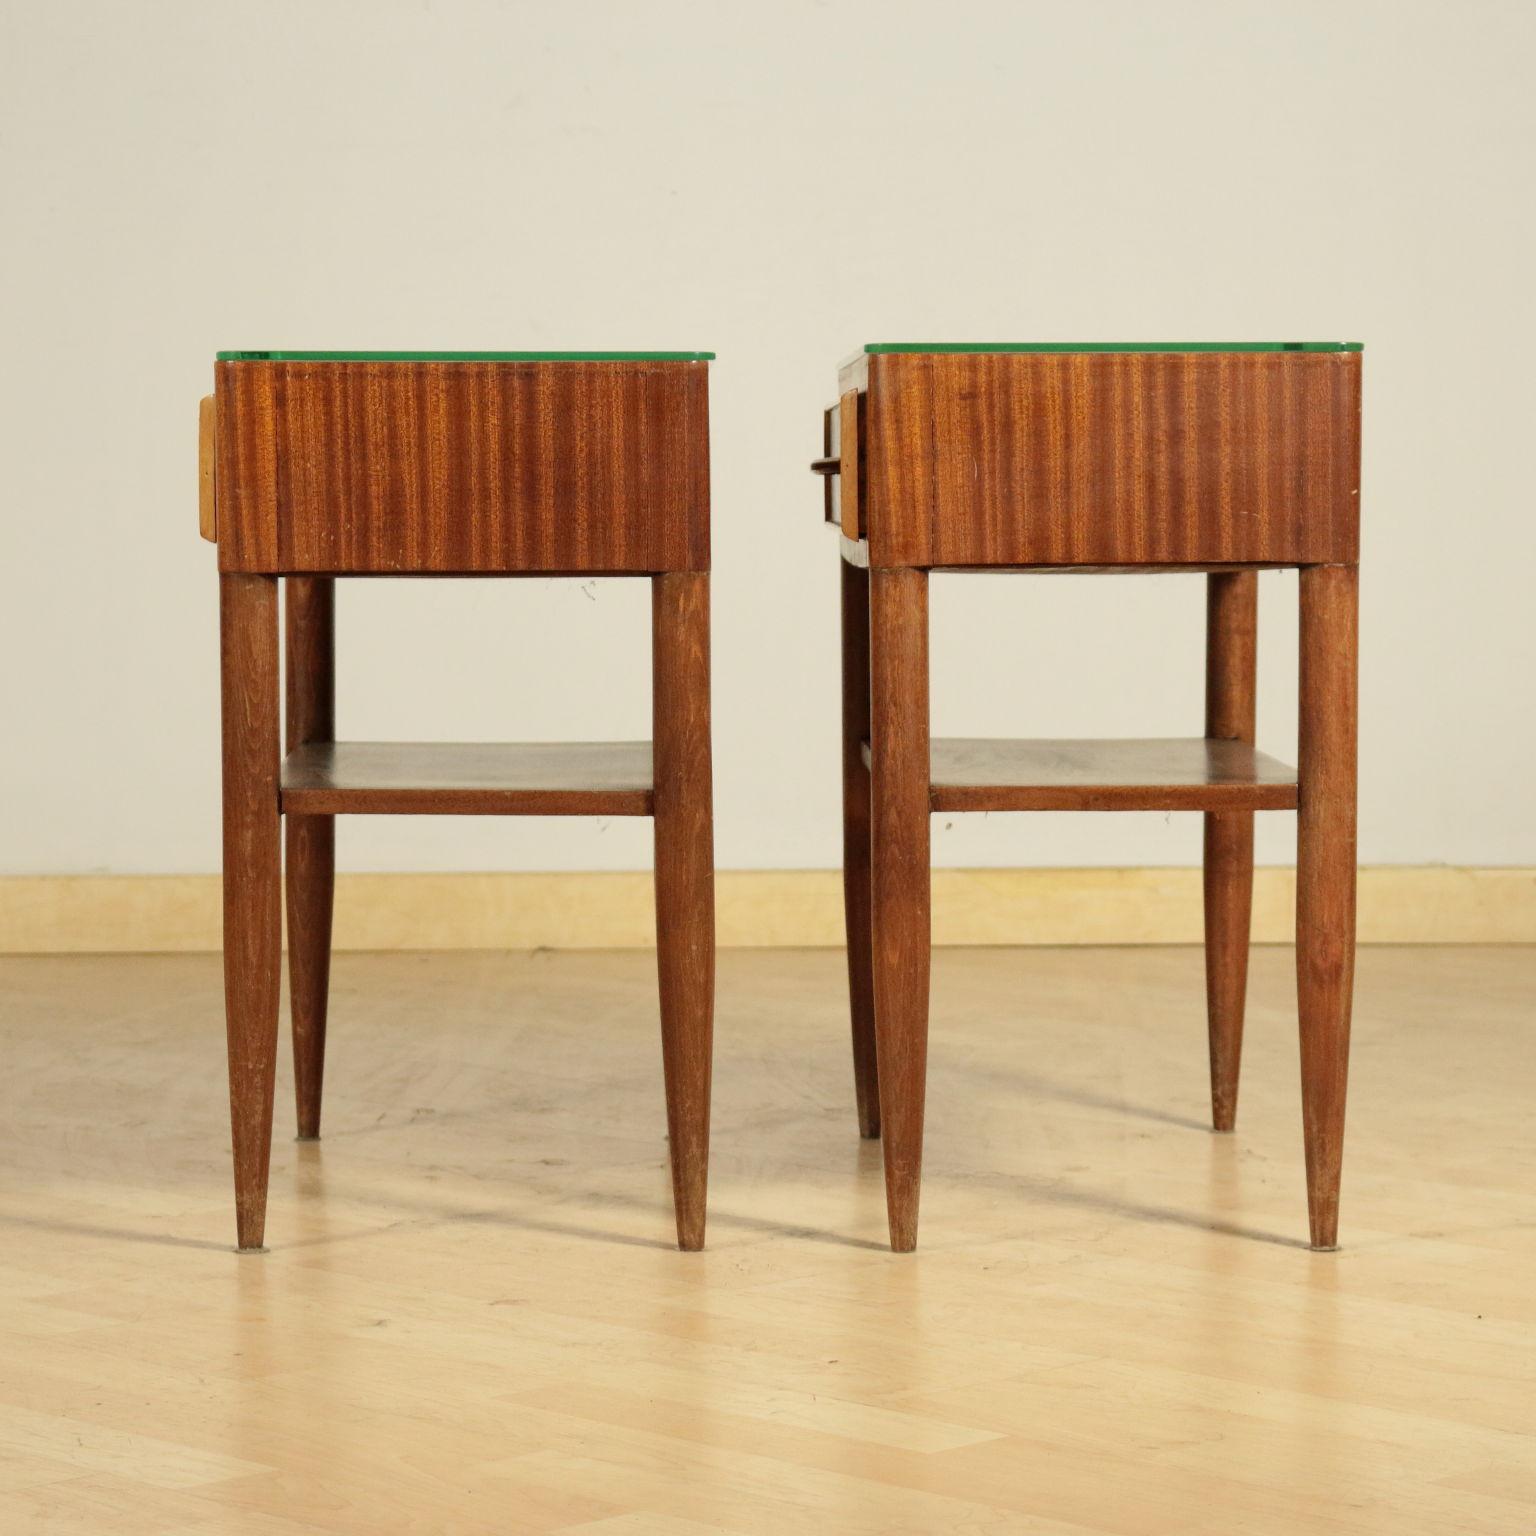 Mid-Century Modern Bedside Tables Stained Beech Mahogany Veneer Glass, Italy, 1950s